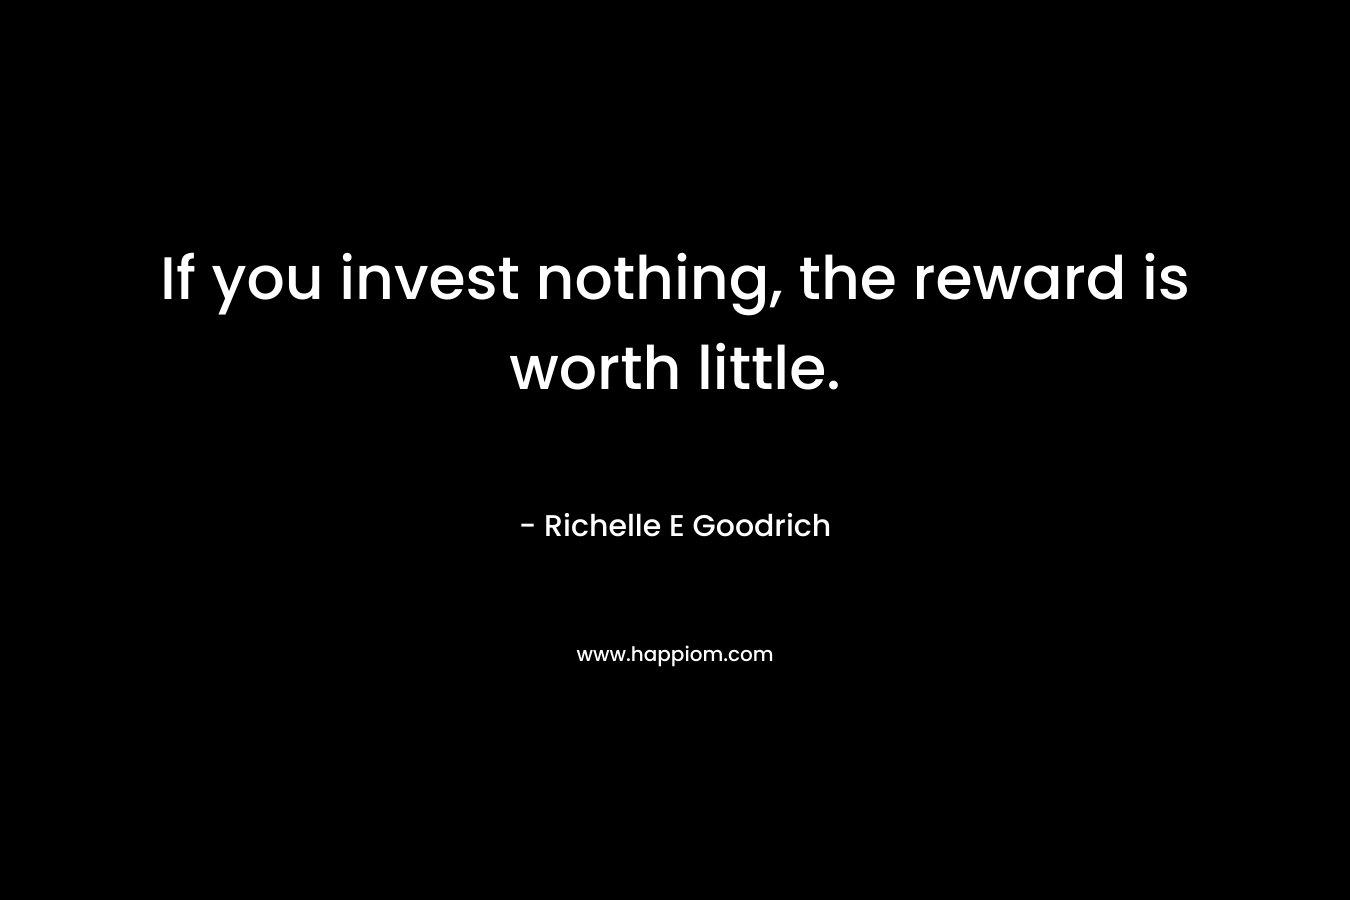 If you invest nothing, the reward is worth little.